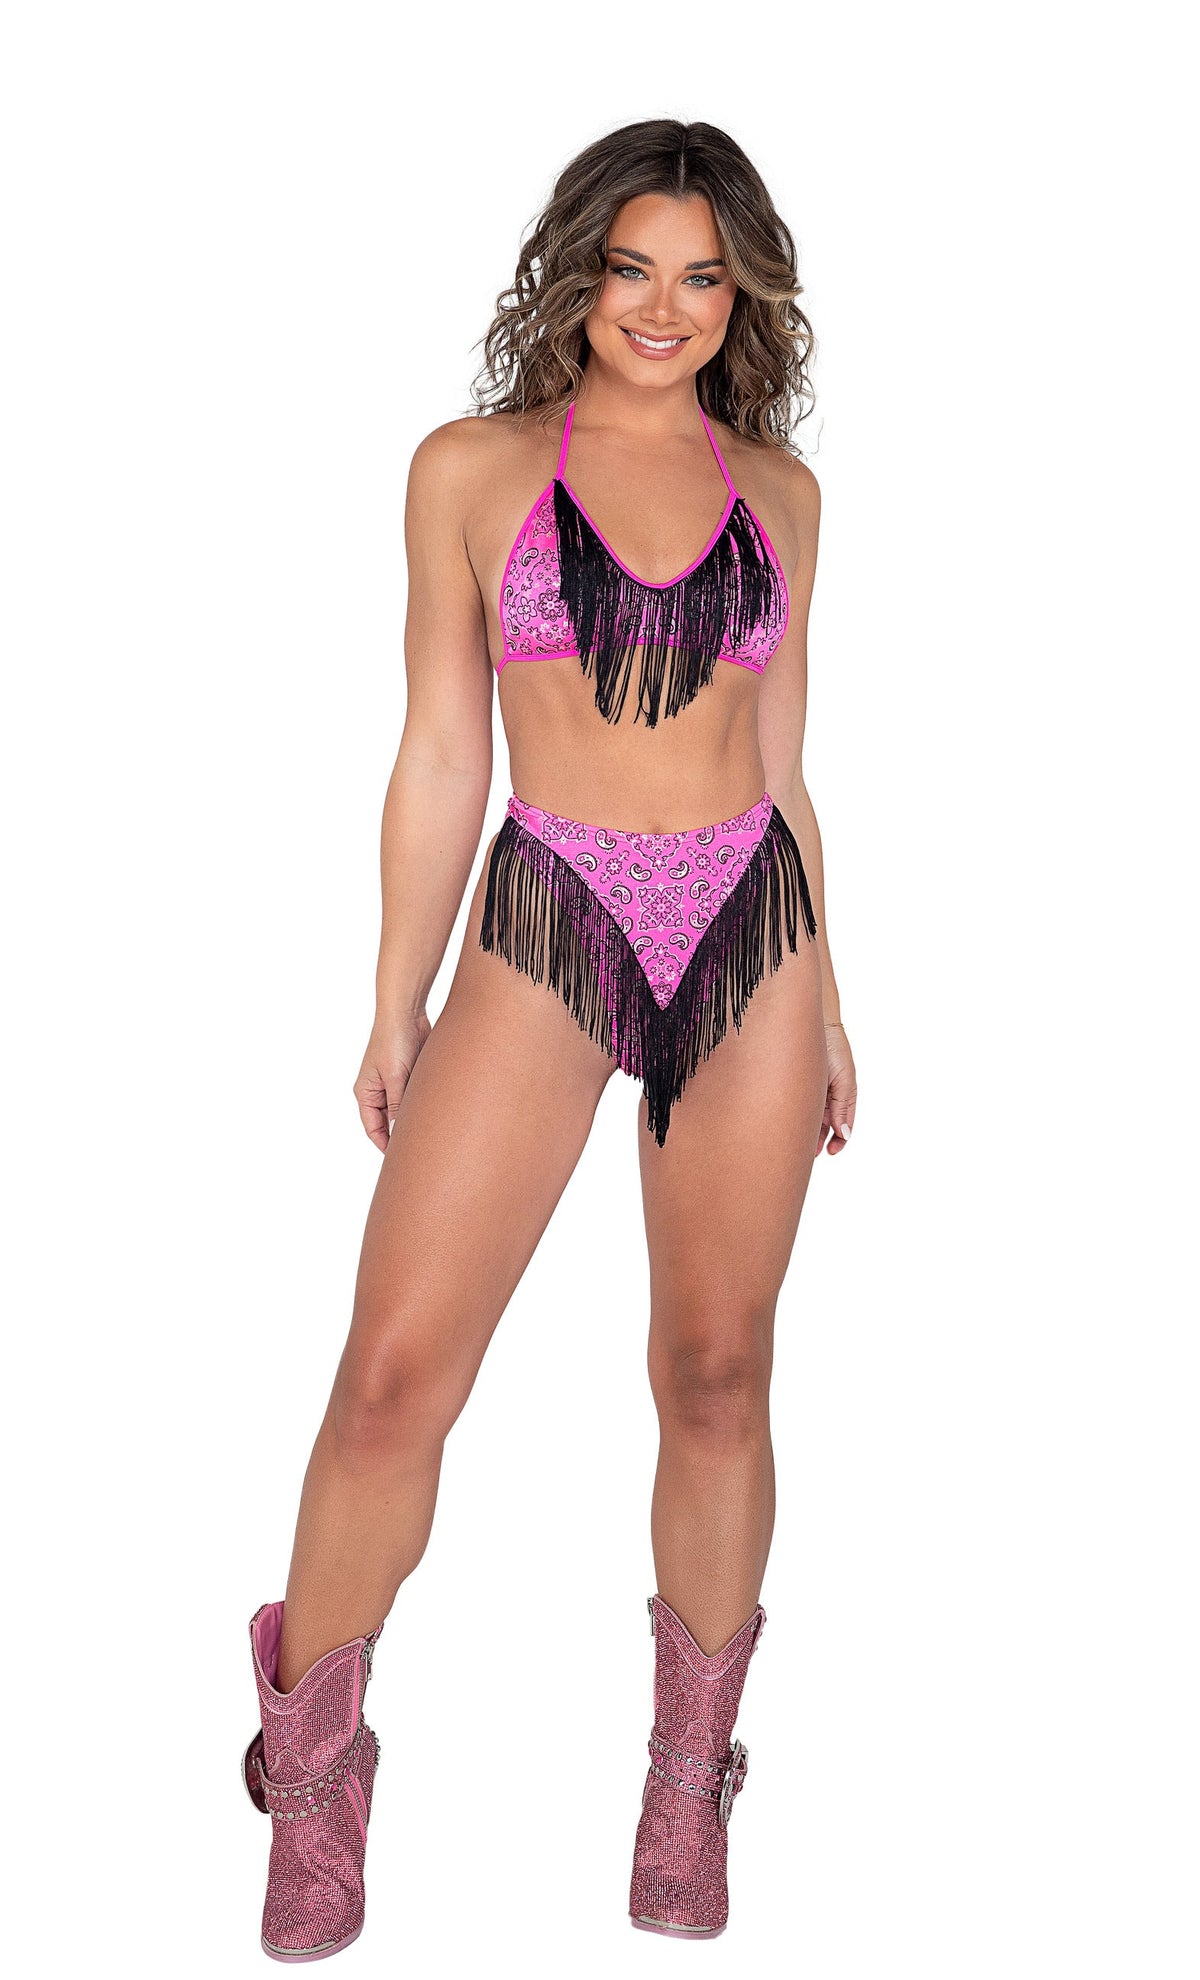 Rave & Festival Wear - Metallic Printed High Waisted Shorts with Fringe Detail-Roma Costume